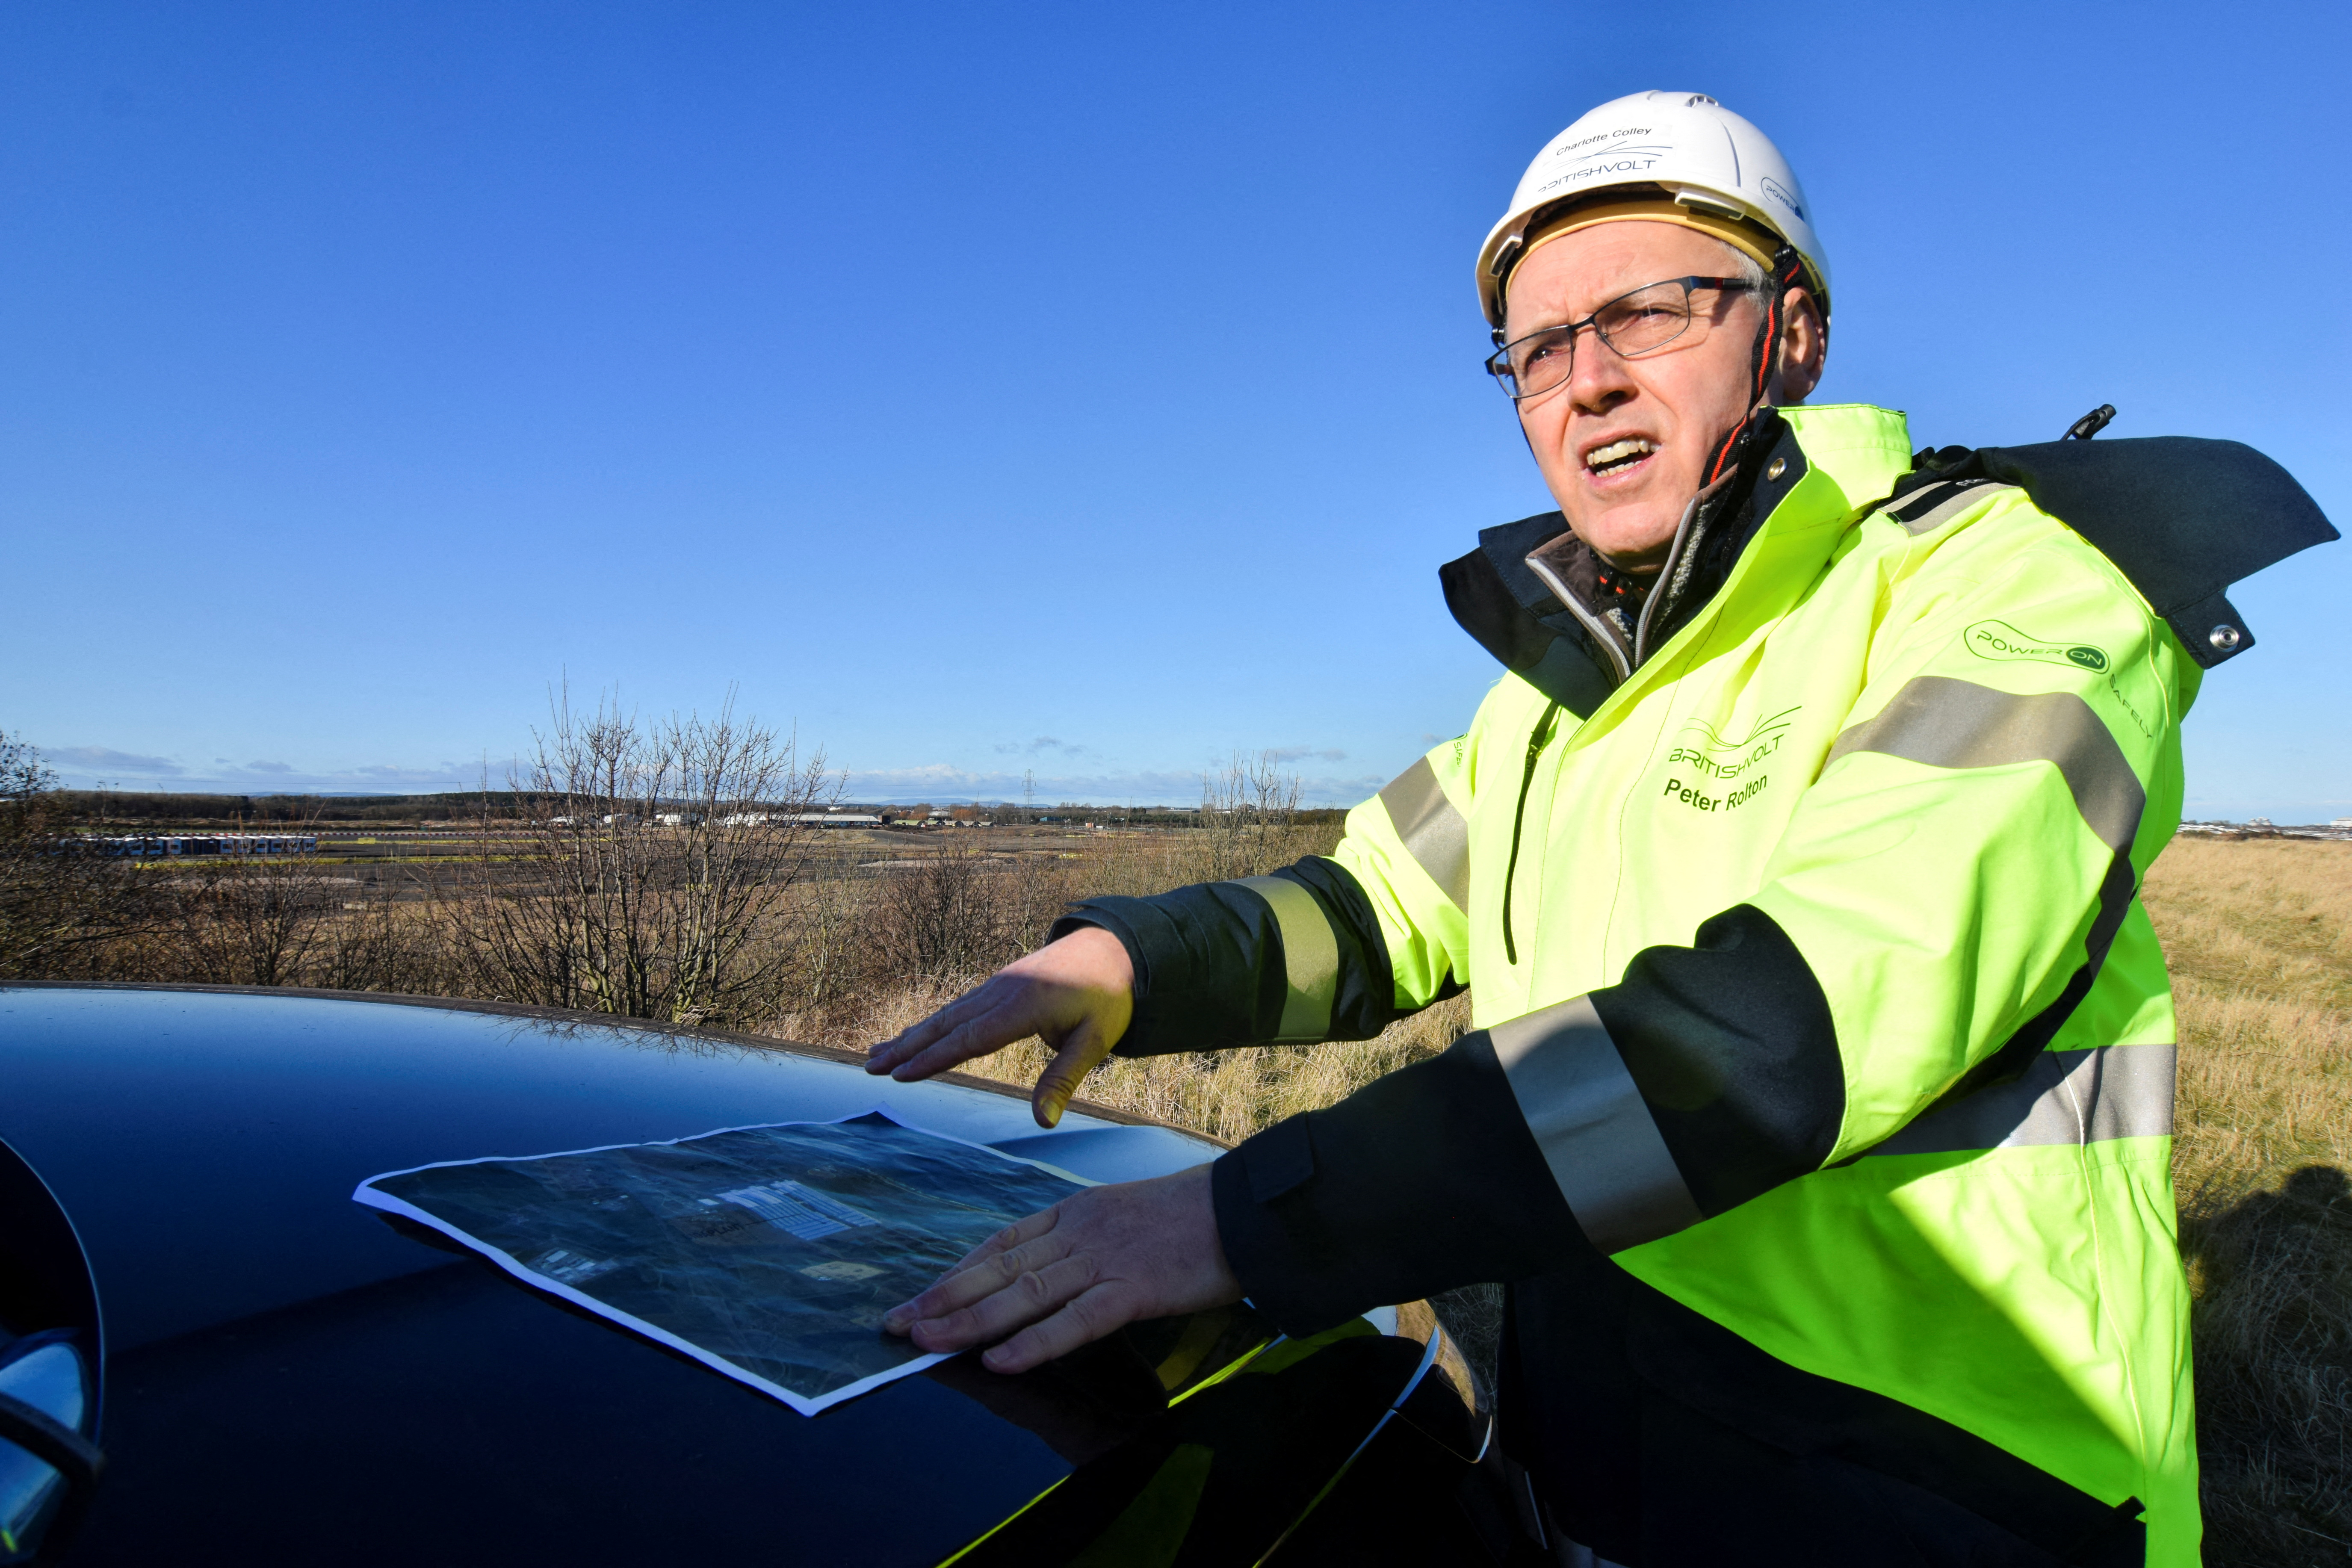 Britishvolt executive chairman Peter Rolton at the site of the company's planned battery plant, in Blyth